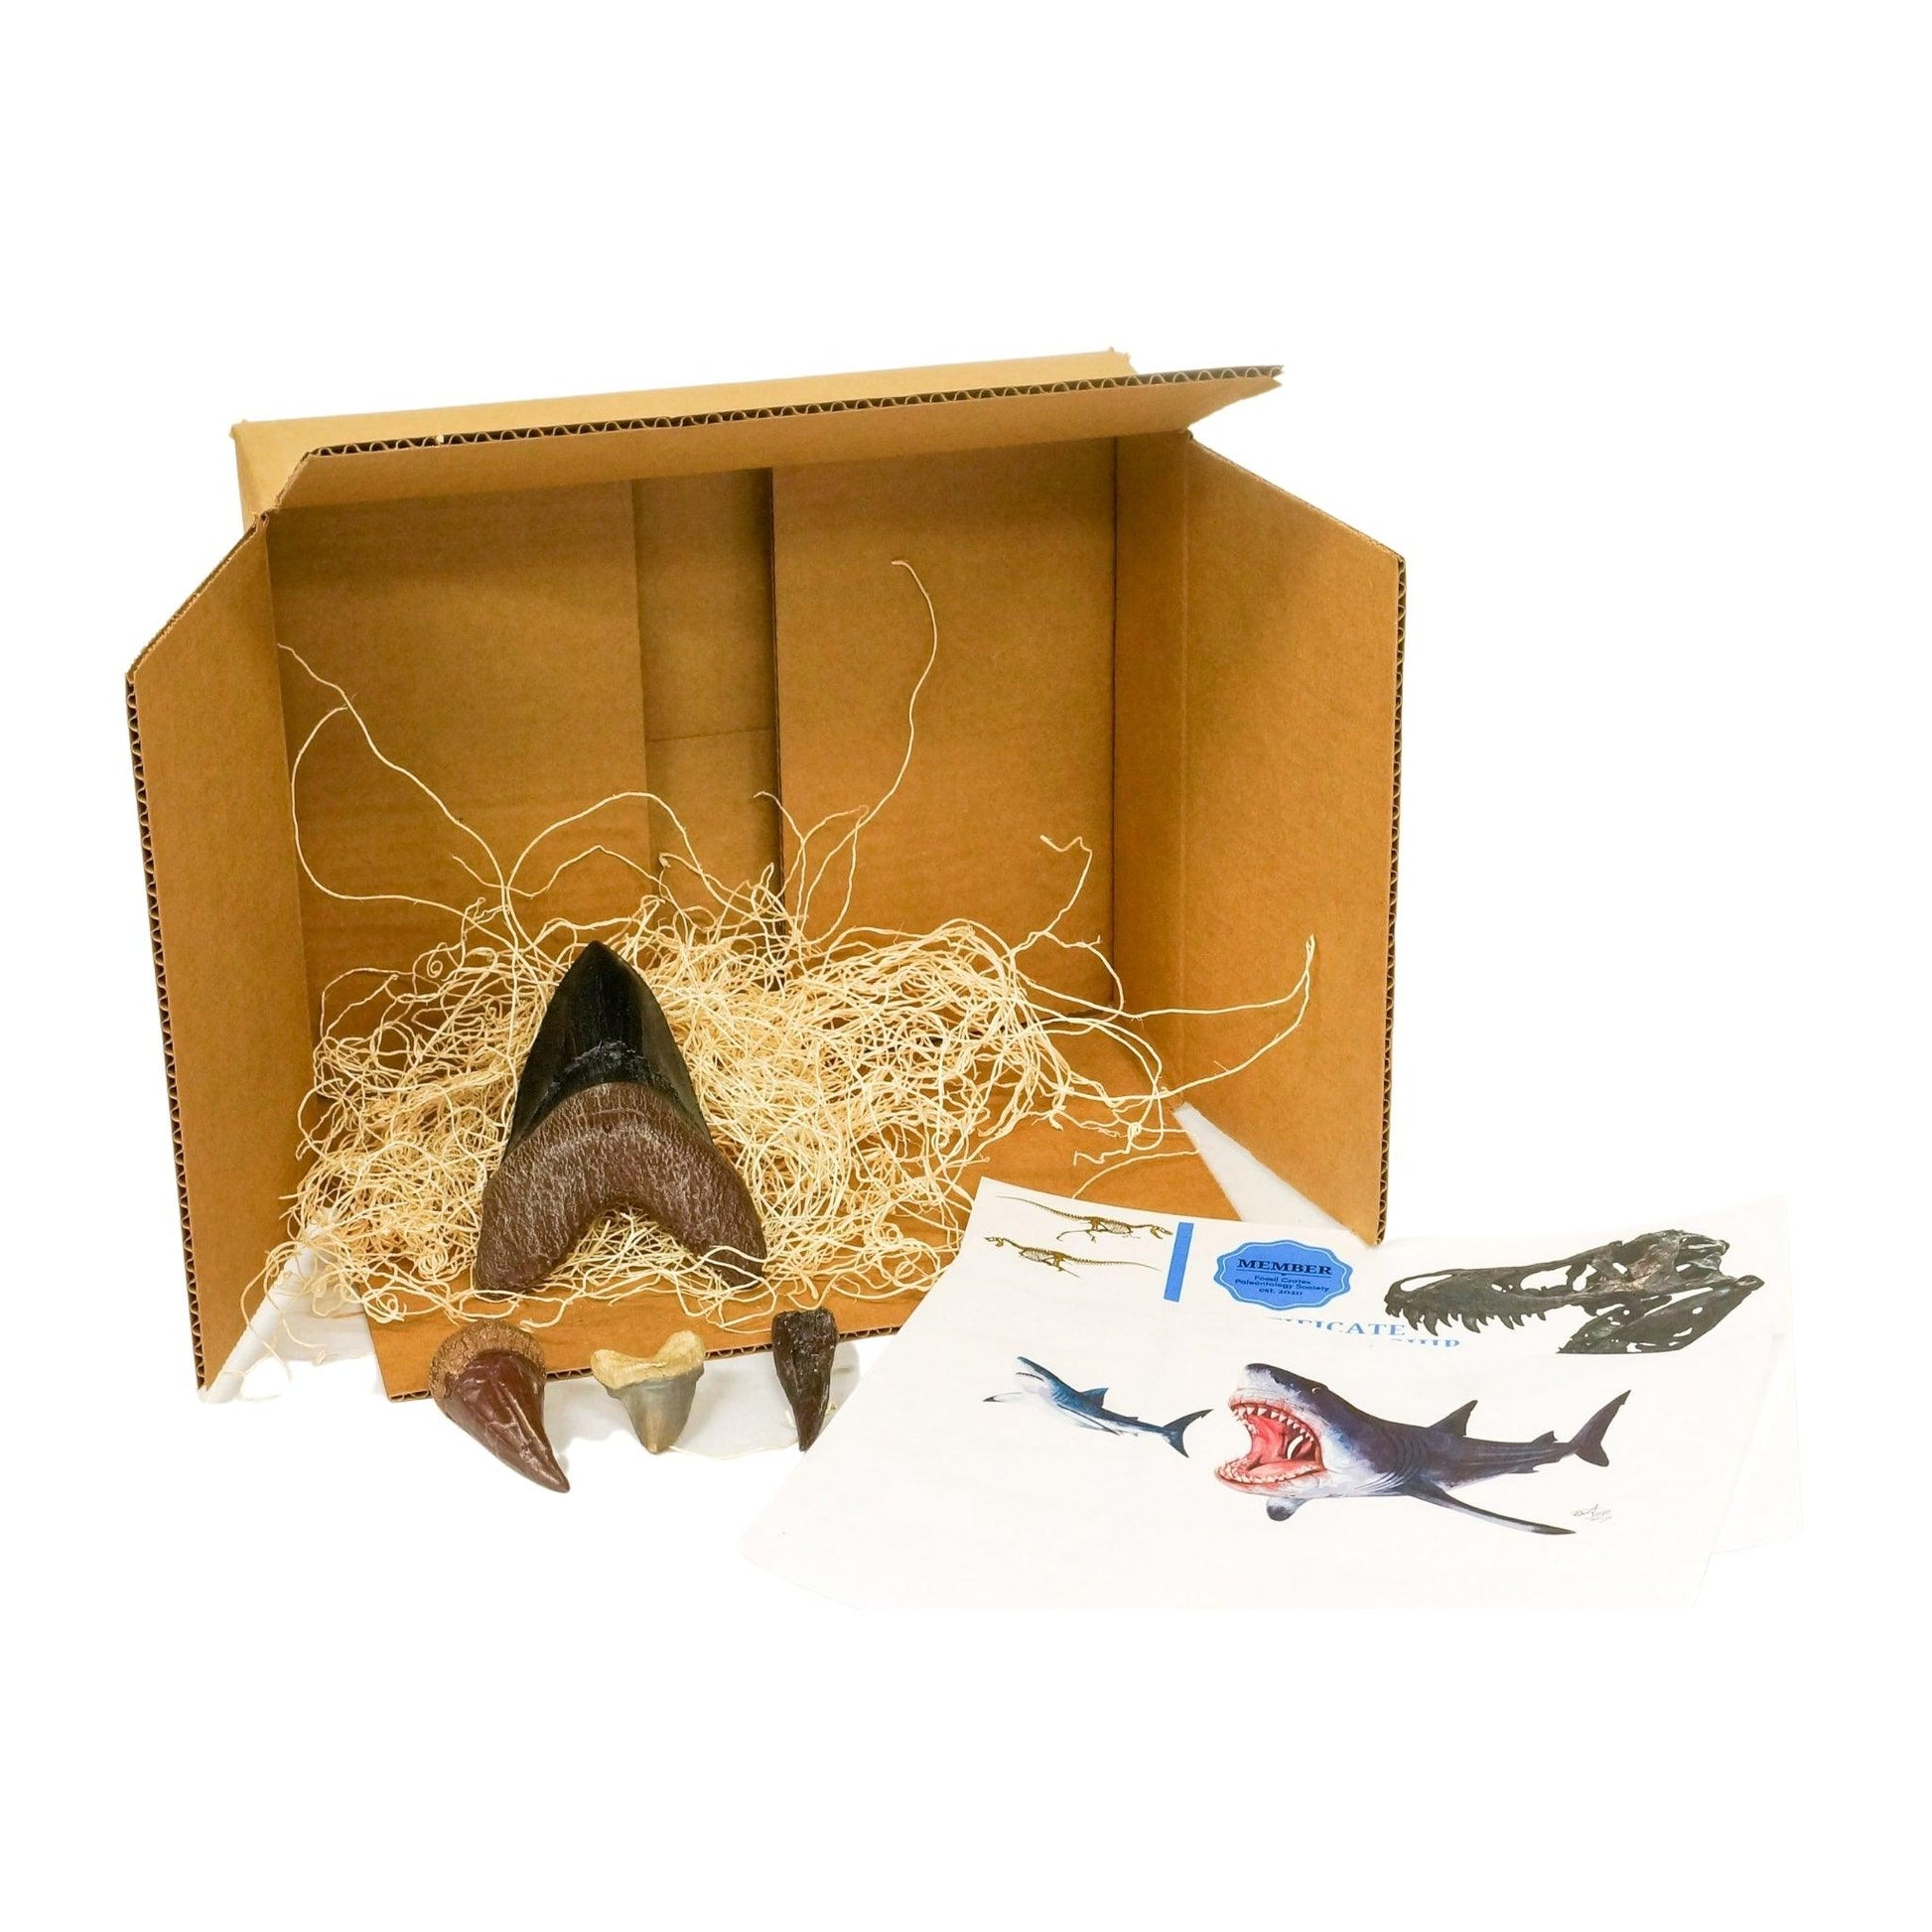 Ultimate Marine Marauders Crate - Fossil Crates Megalodon tooth cast